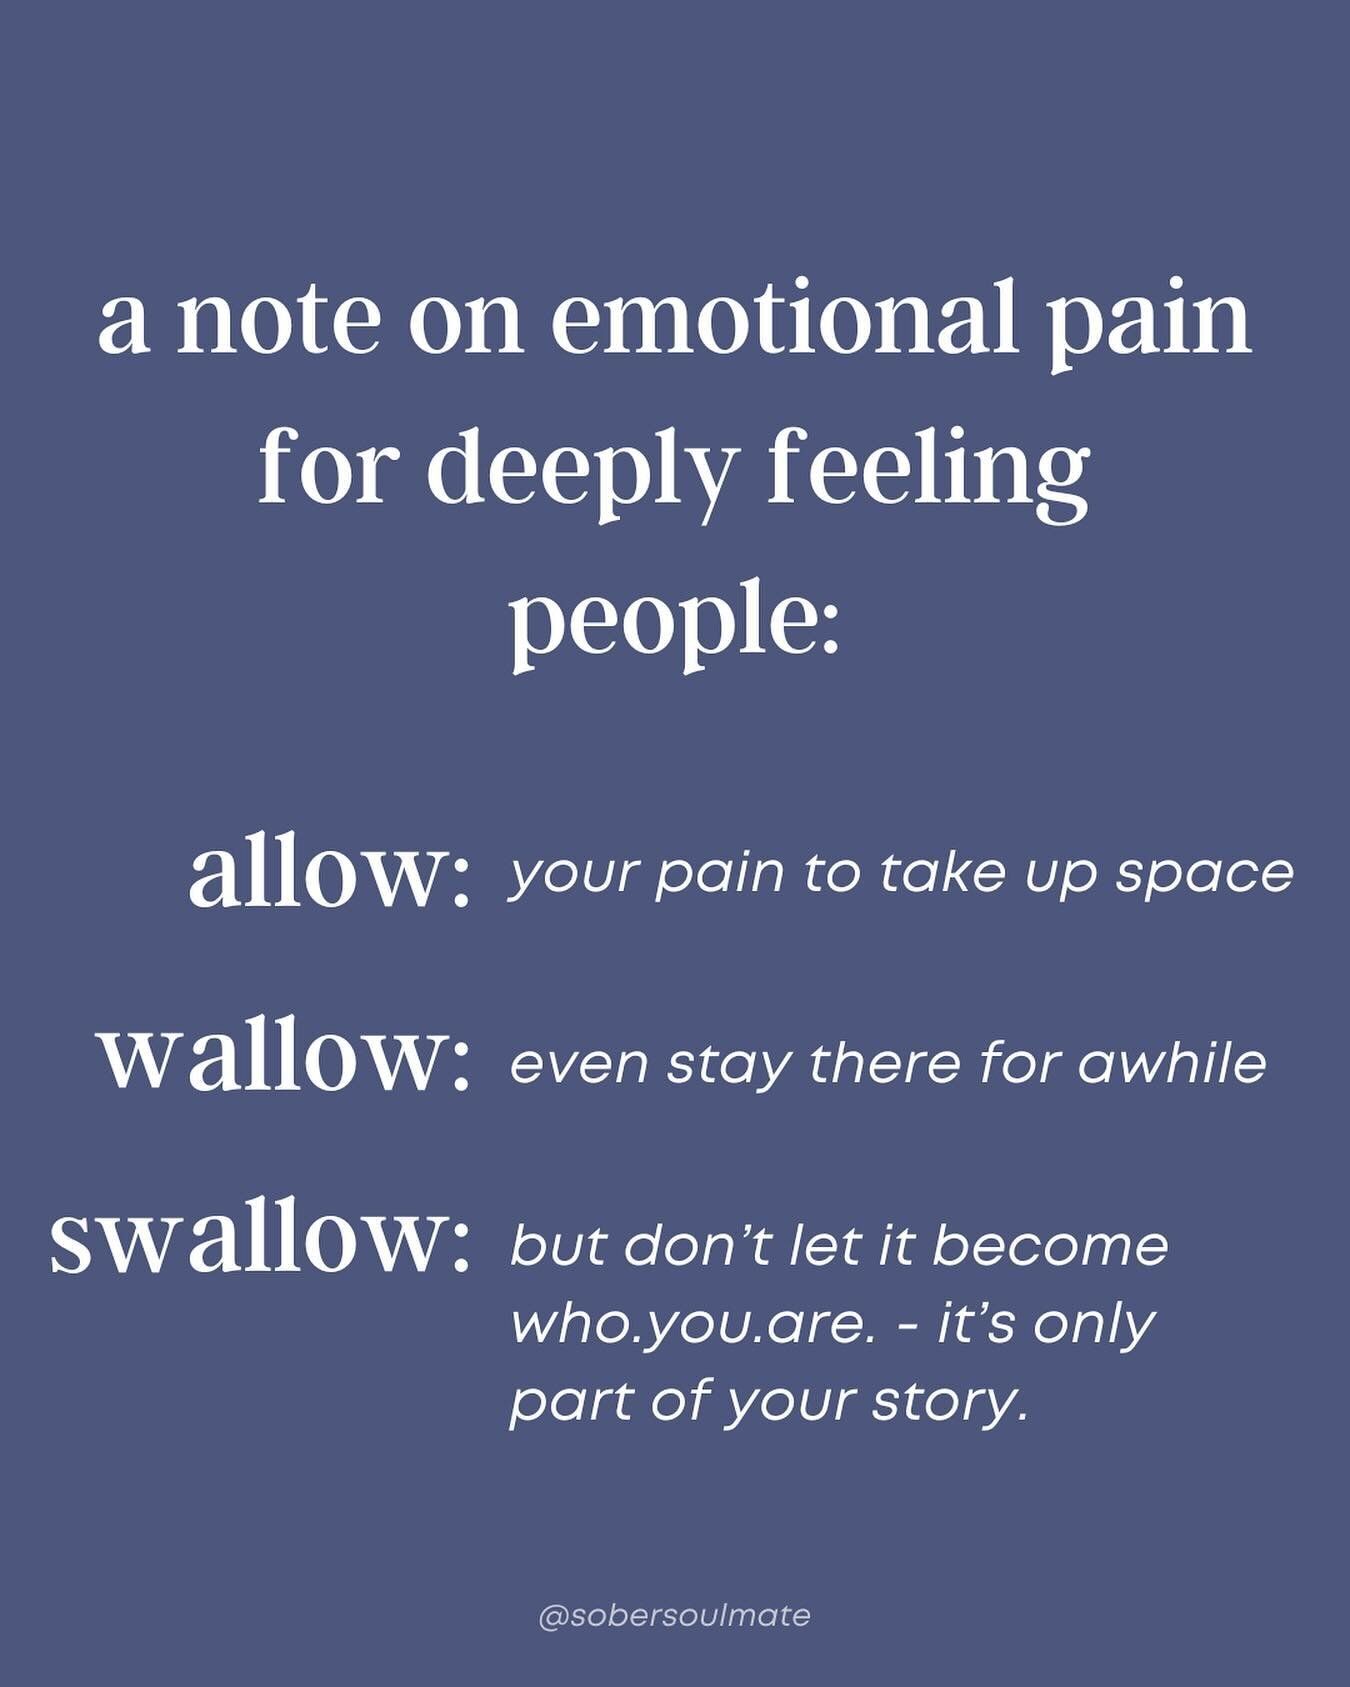 How closely and intimately do you live with your pain?

How much space does it take up within you?

How much does its presence suck the air out of the room, not letting the other parts of you get the oxygen they need and deserve?

Do you know who you